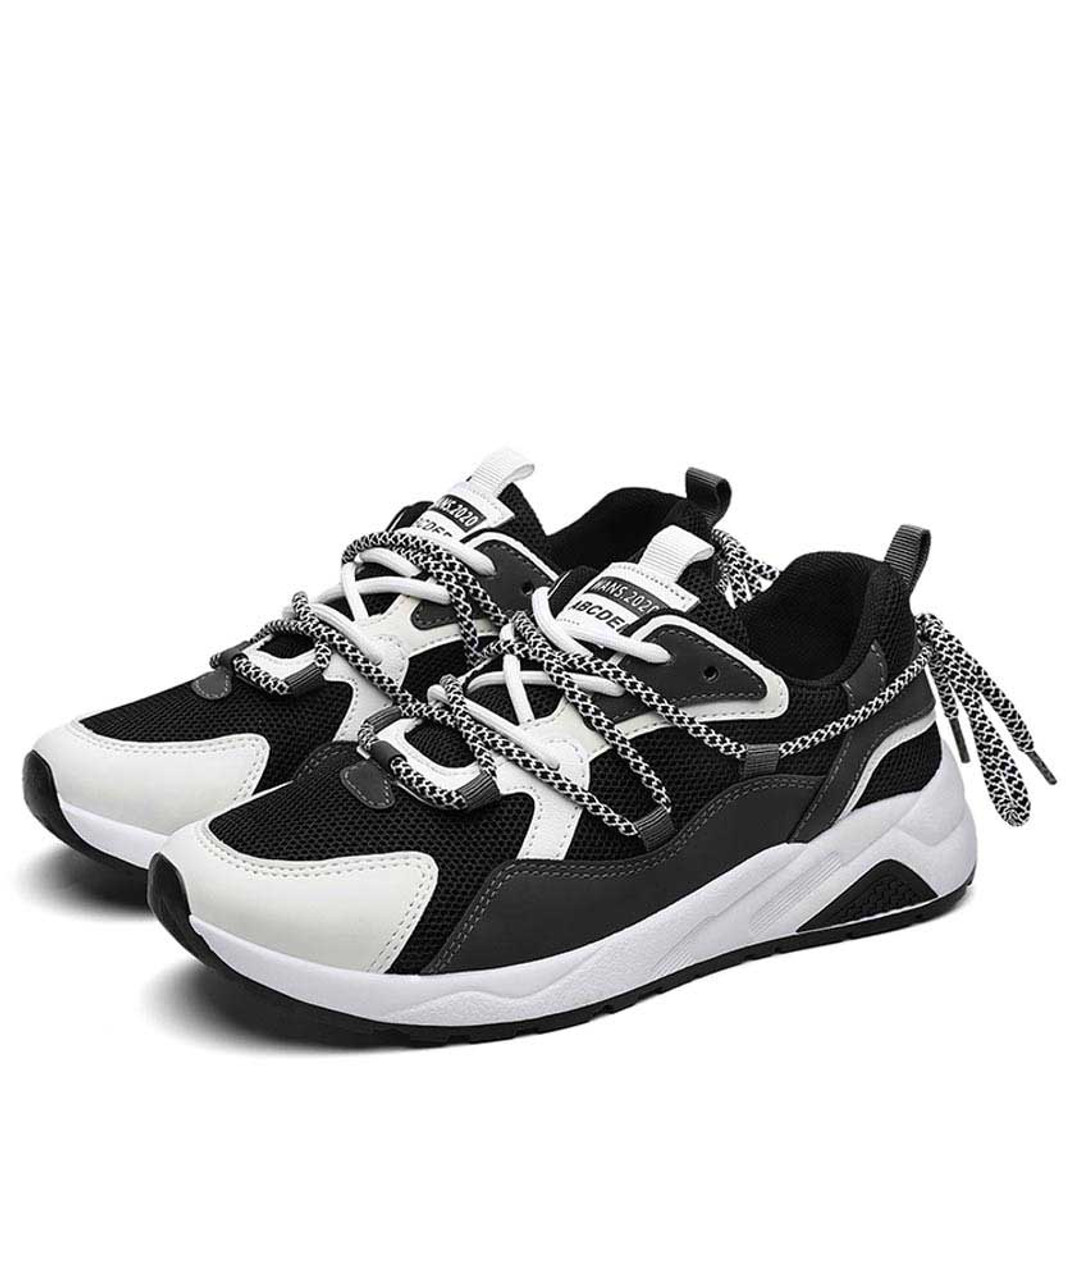 Black multi color shoe sneaker lace front and rear | Womens sneakers ...